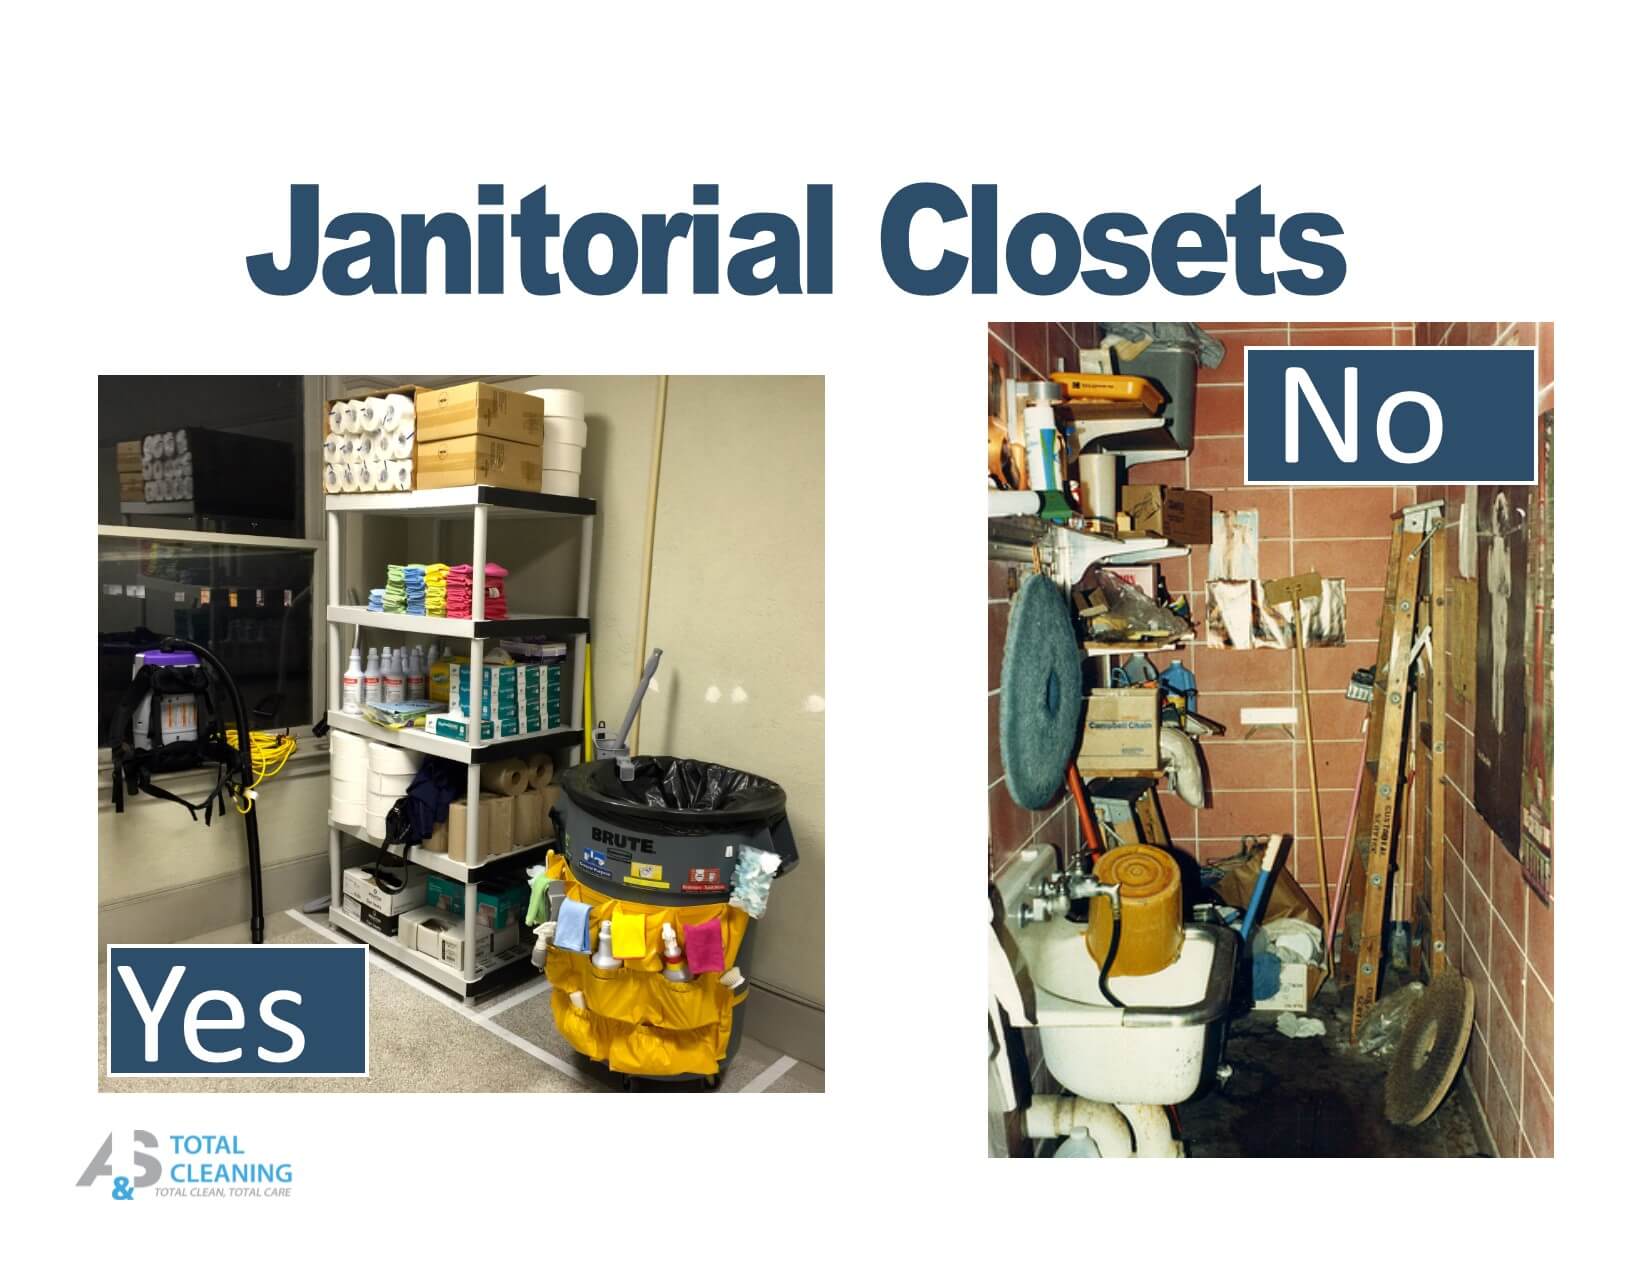 https://totalcleaning.com/wp-content/uploads/2016/03/Janitorial-closets-2016-1-1.jpg